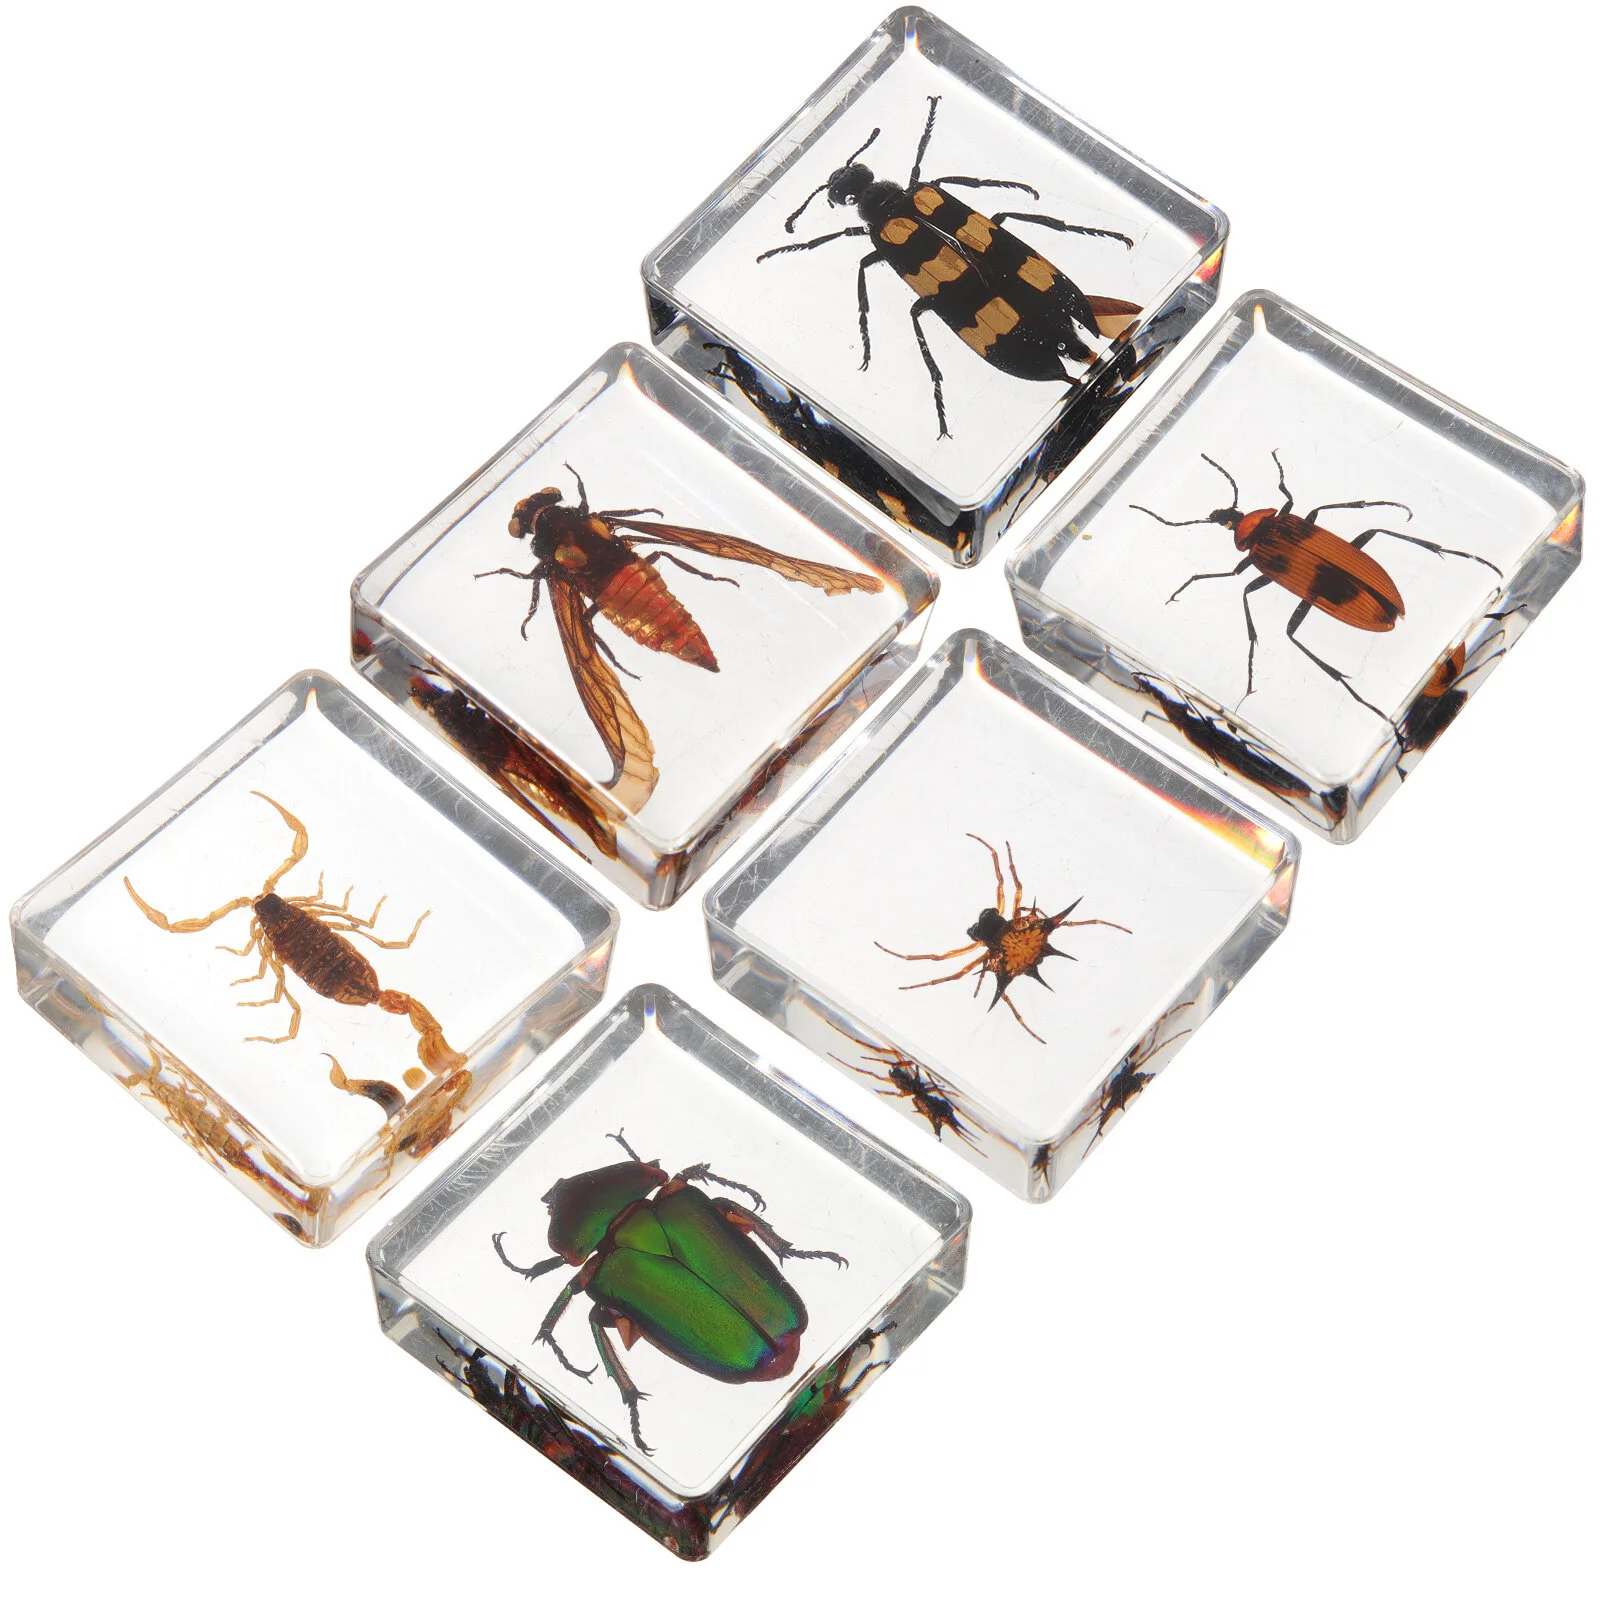 

6 Pcs Insect Specimen Insects Desktop Decors Ornament Table Decorations Ornaments Resin Adorn Natural Delicate Student Home